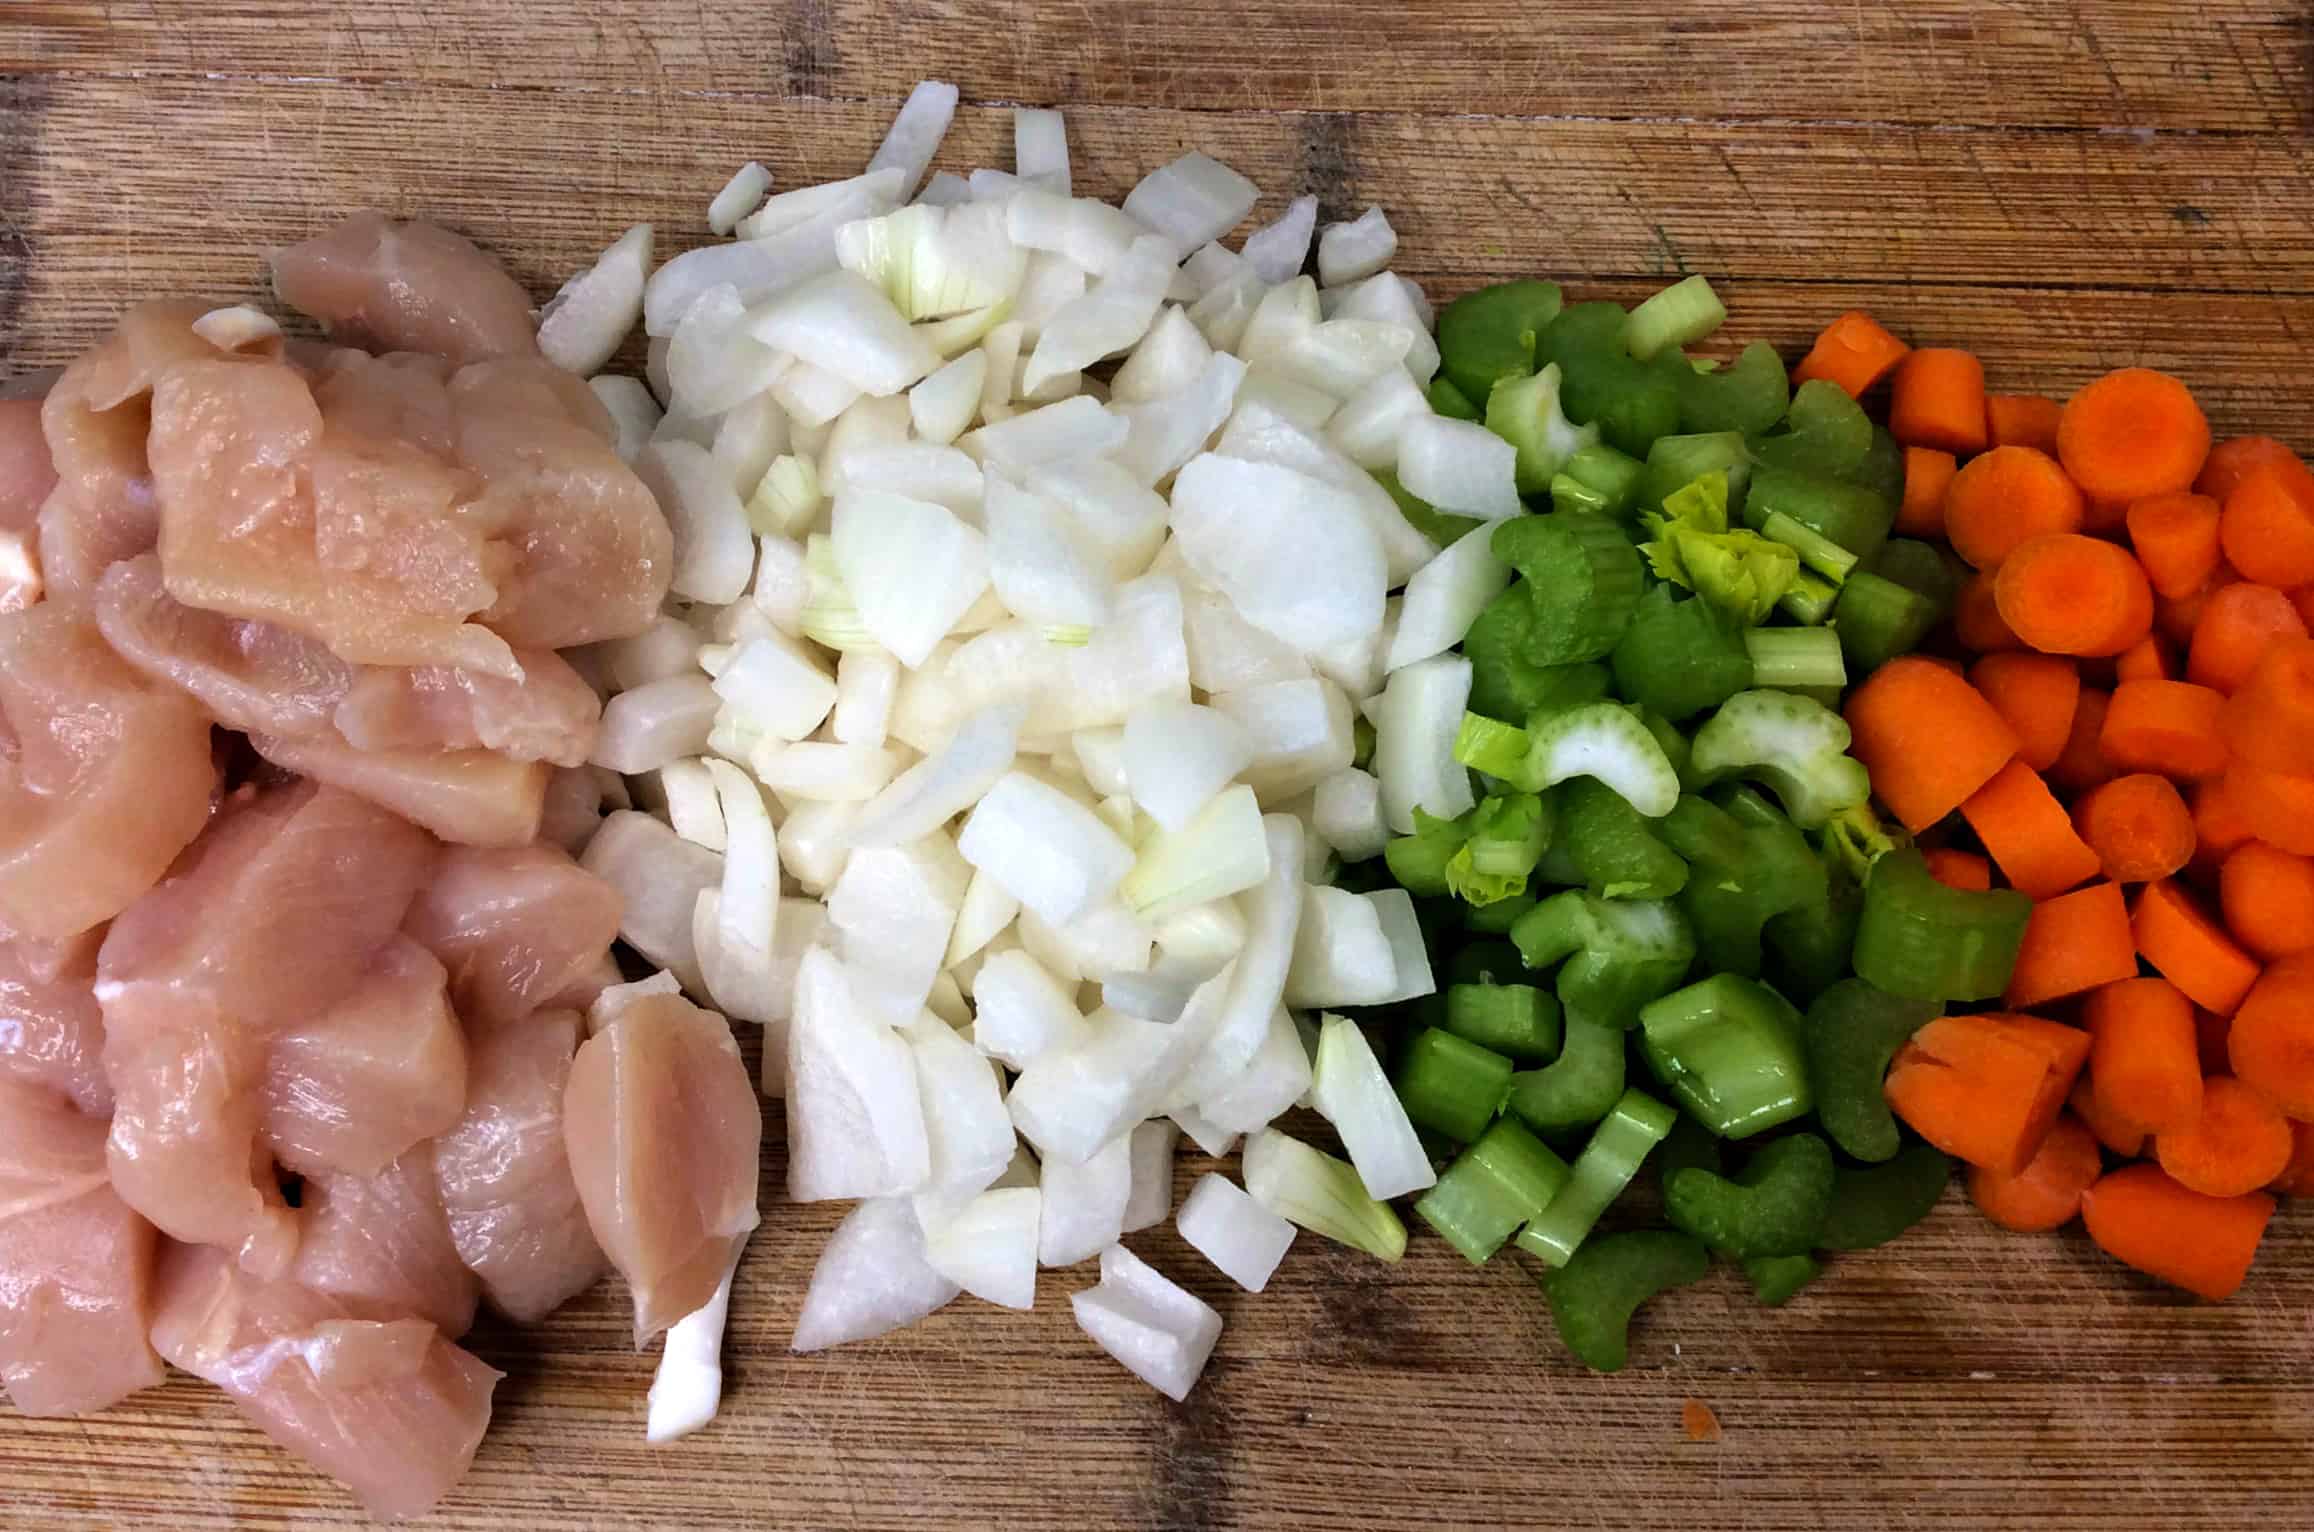 diced ingredients for soup